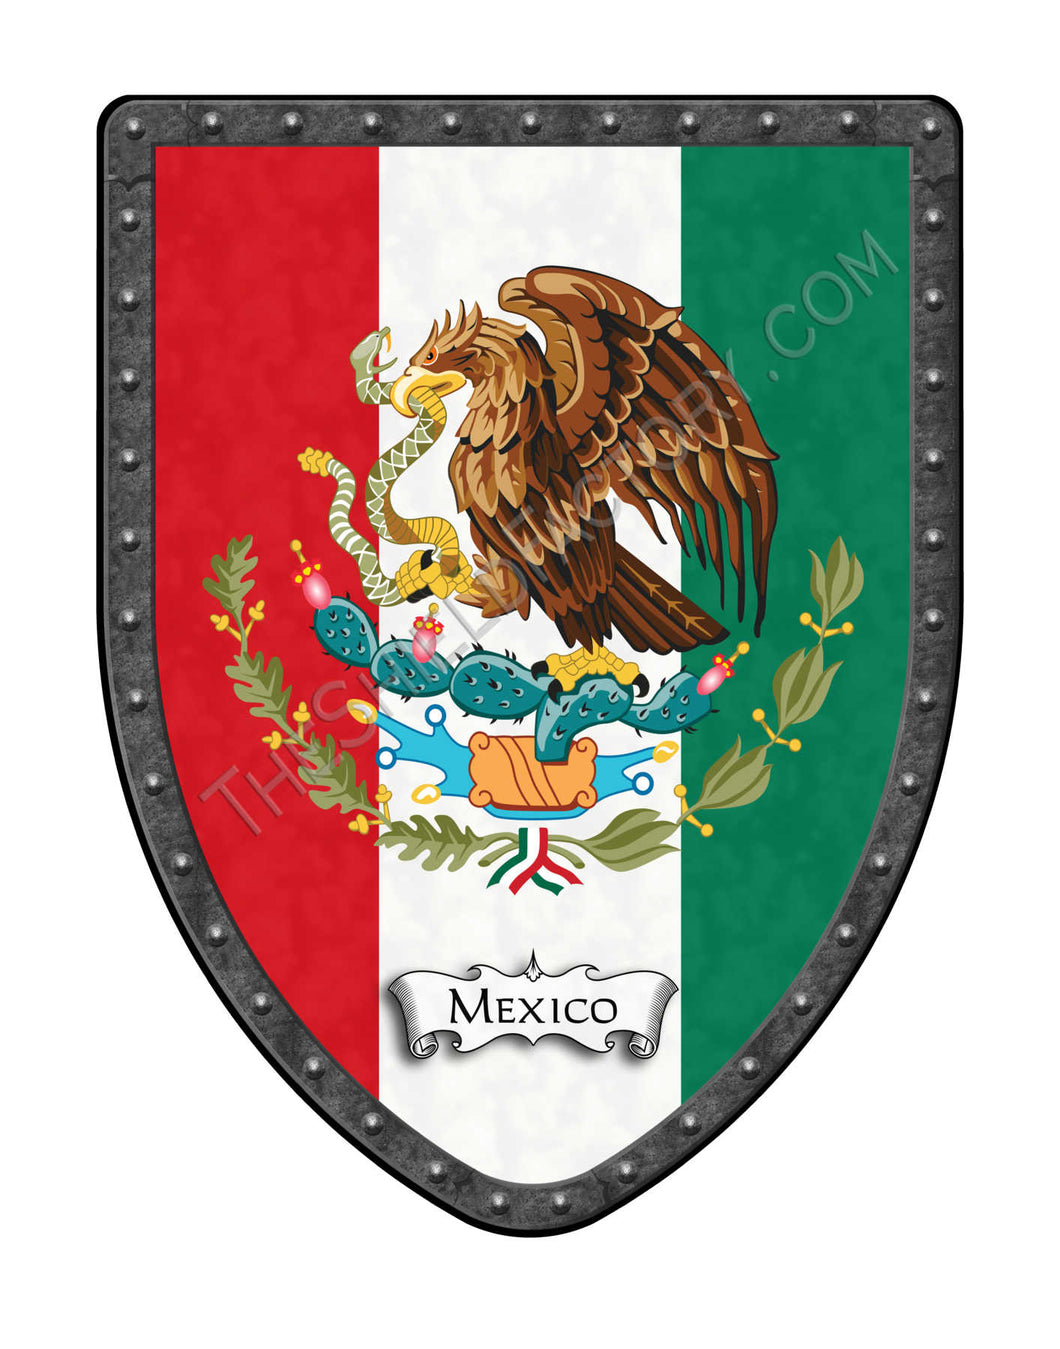 Mexico Coat of Arms Shield